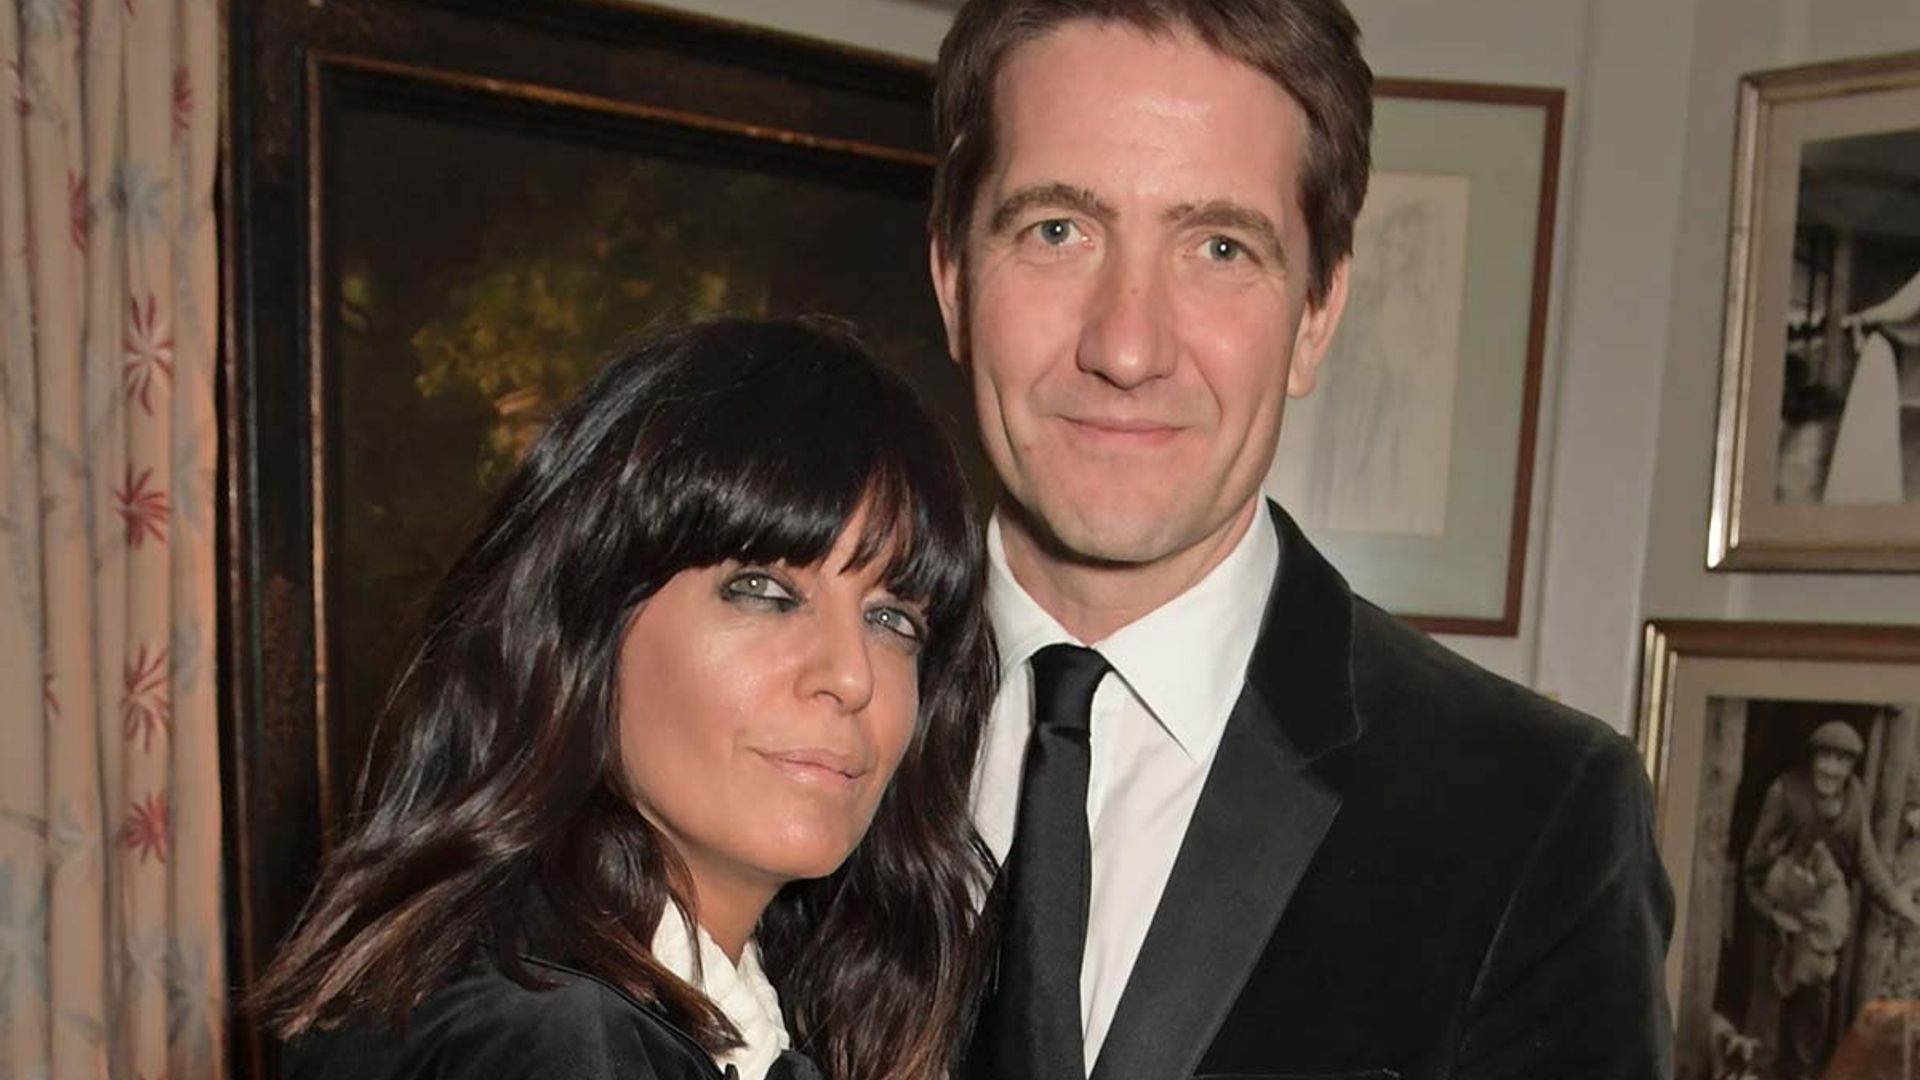 Strictly's Claudia Winkleman reveals unusual phobia that interferes with her marriage